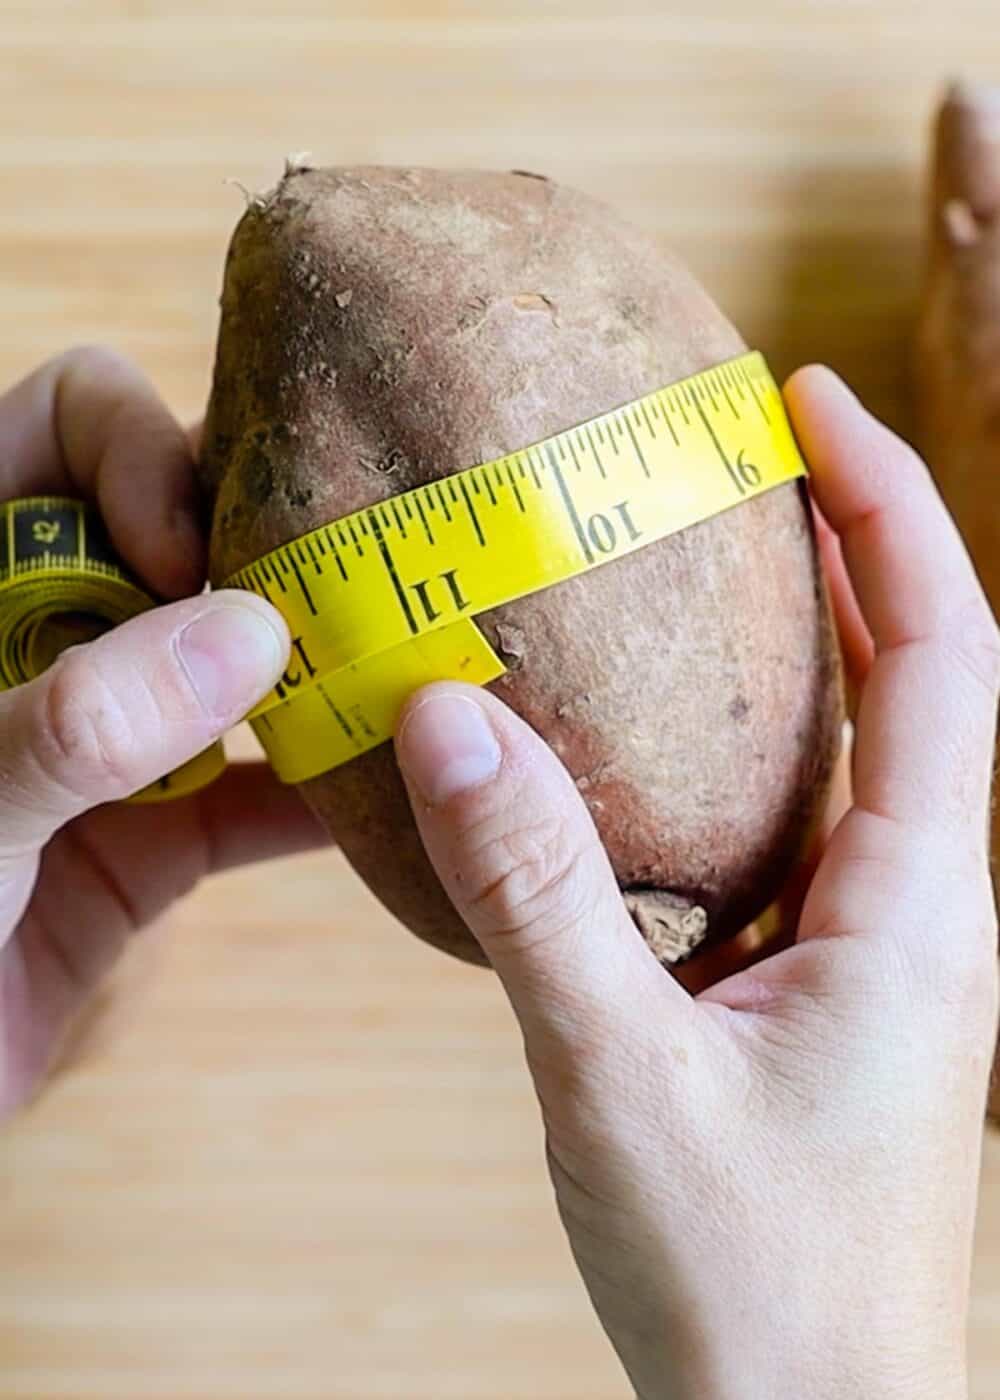 Measuring circumference of sweet potato with a yellow measuring tape.